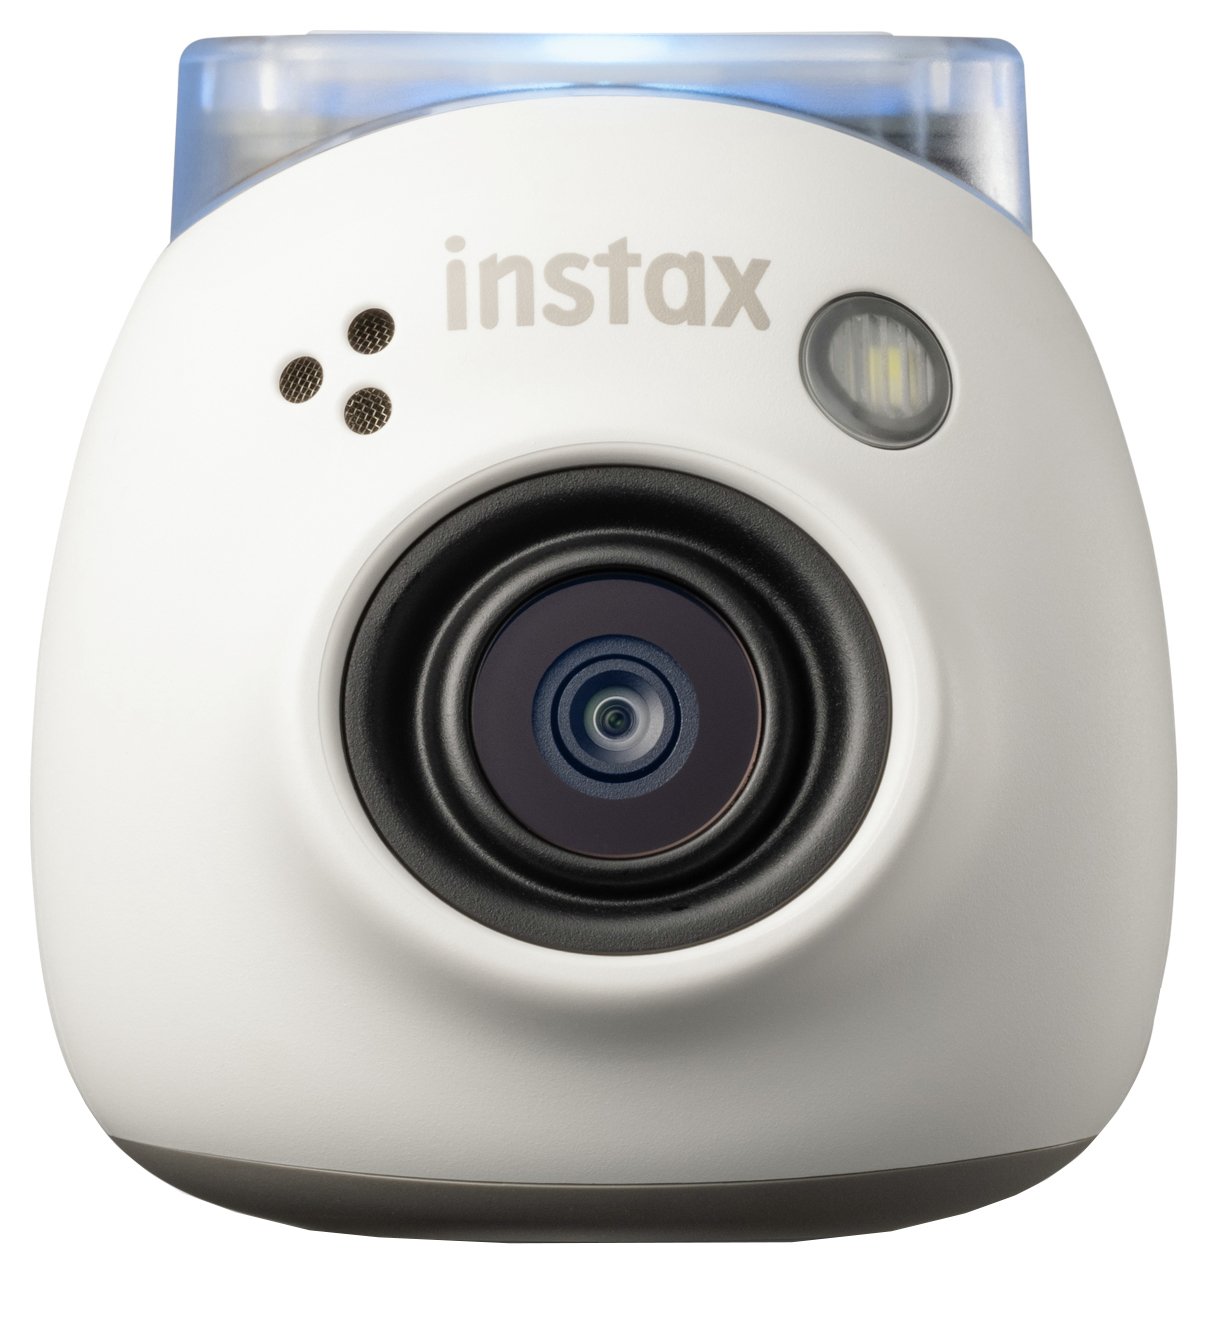 instax Pal Digital Compact Camera - Milky White